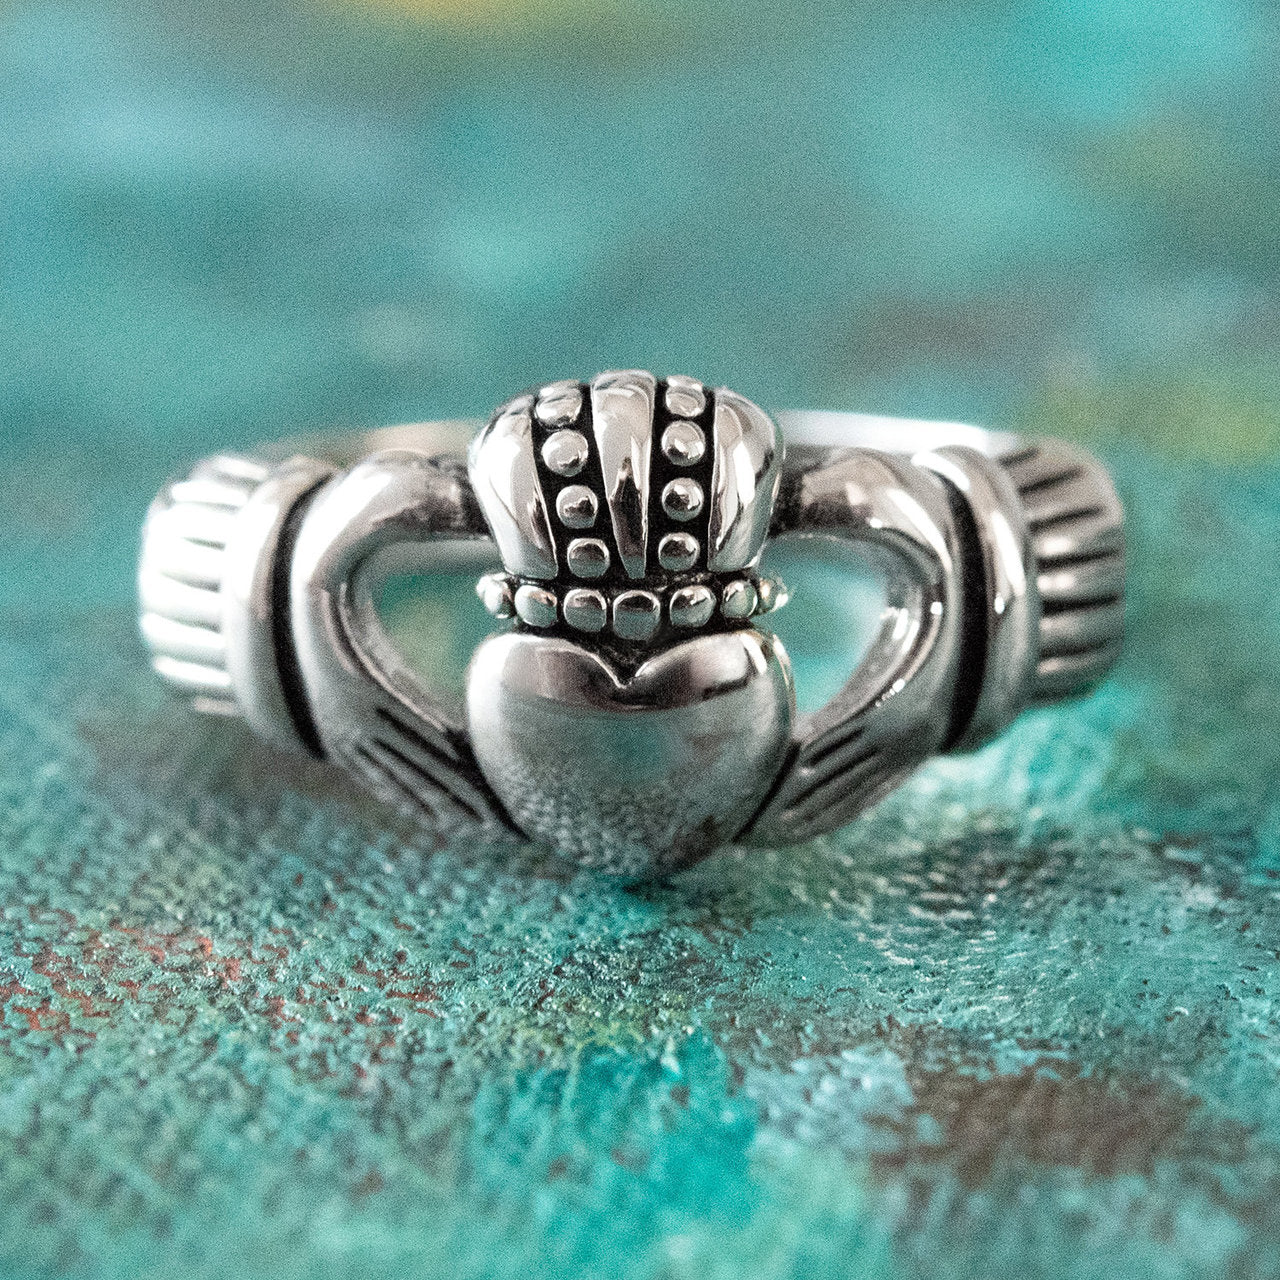 Claddagh ring meaning and how to wear it - DiamondNet